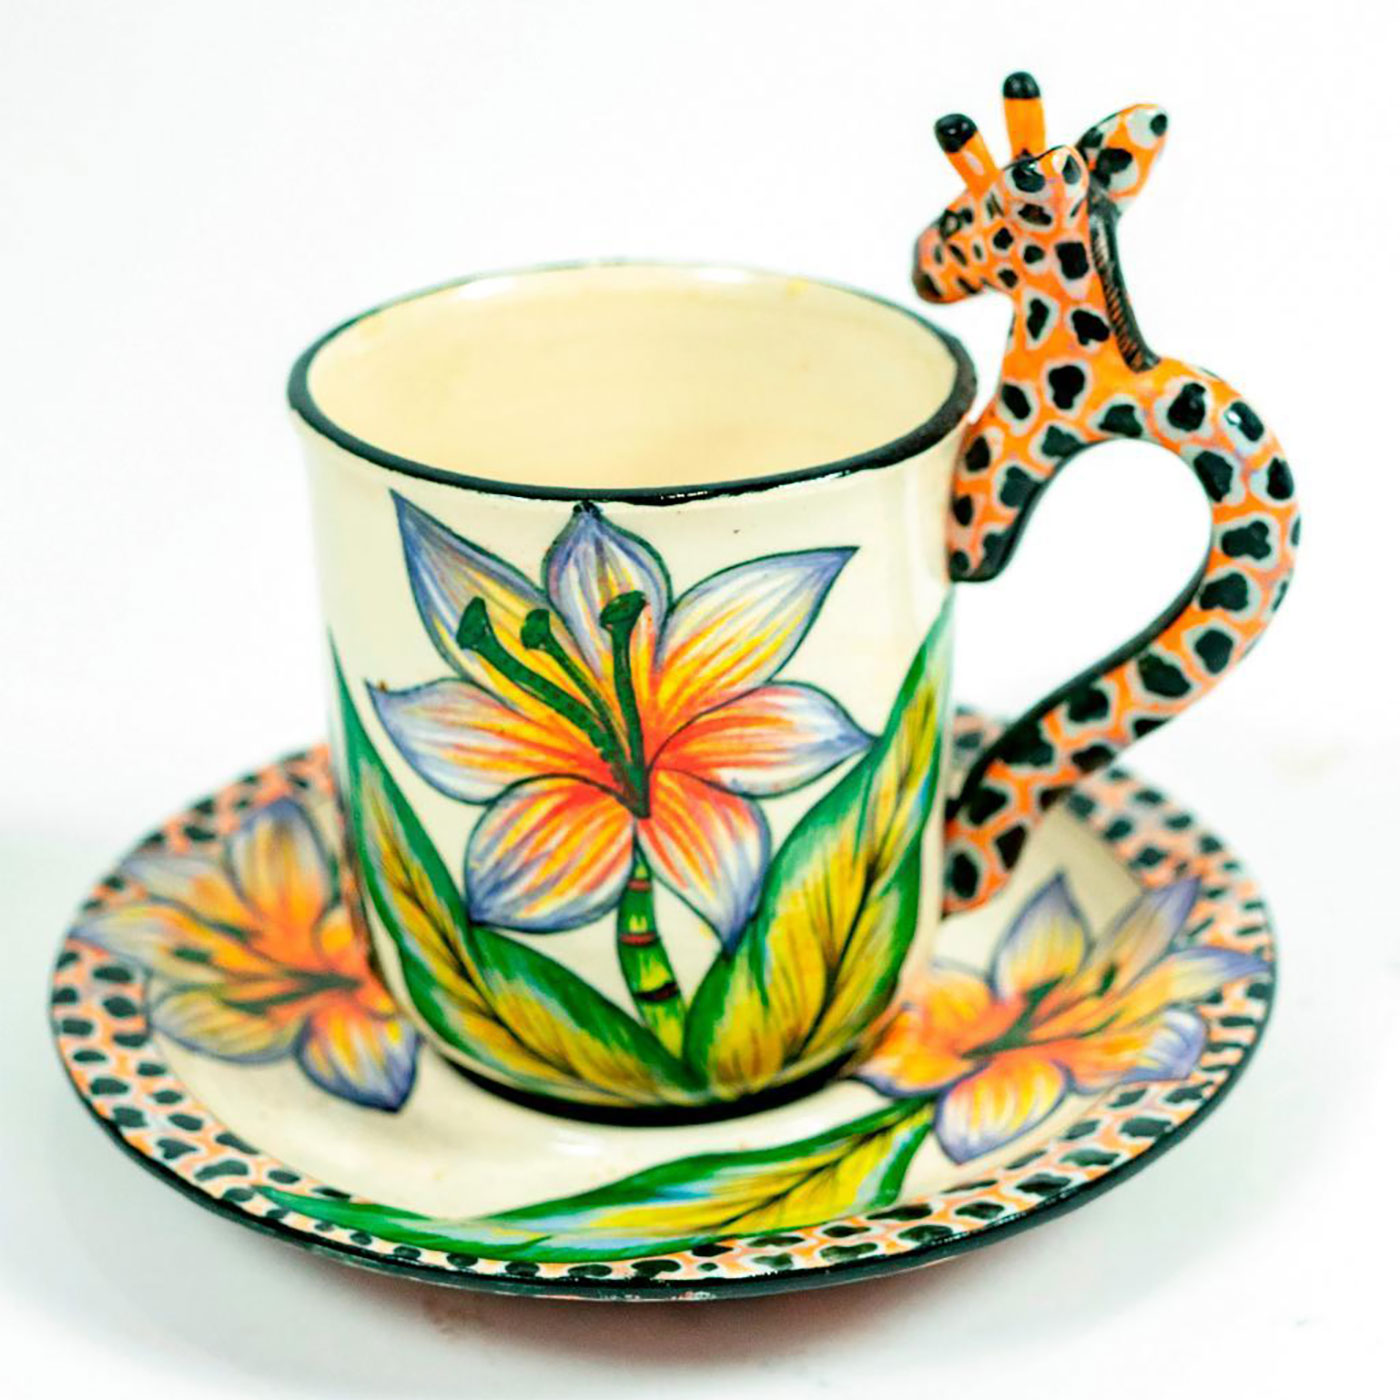 Ardmore Studio Espresso Cup and Saucer - Image 3 of 6